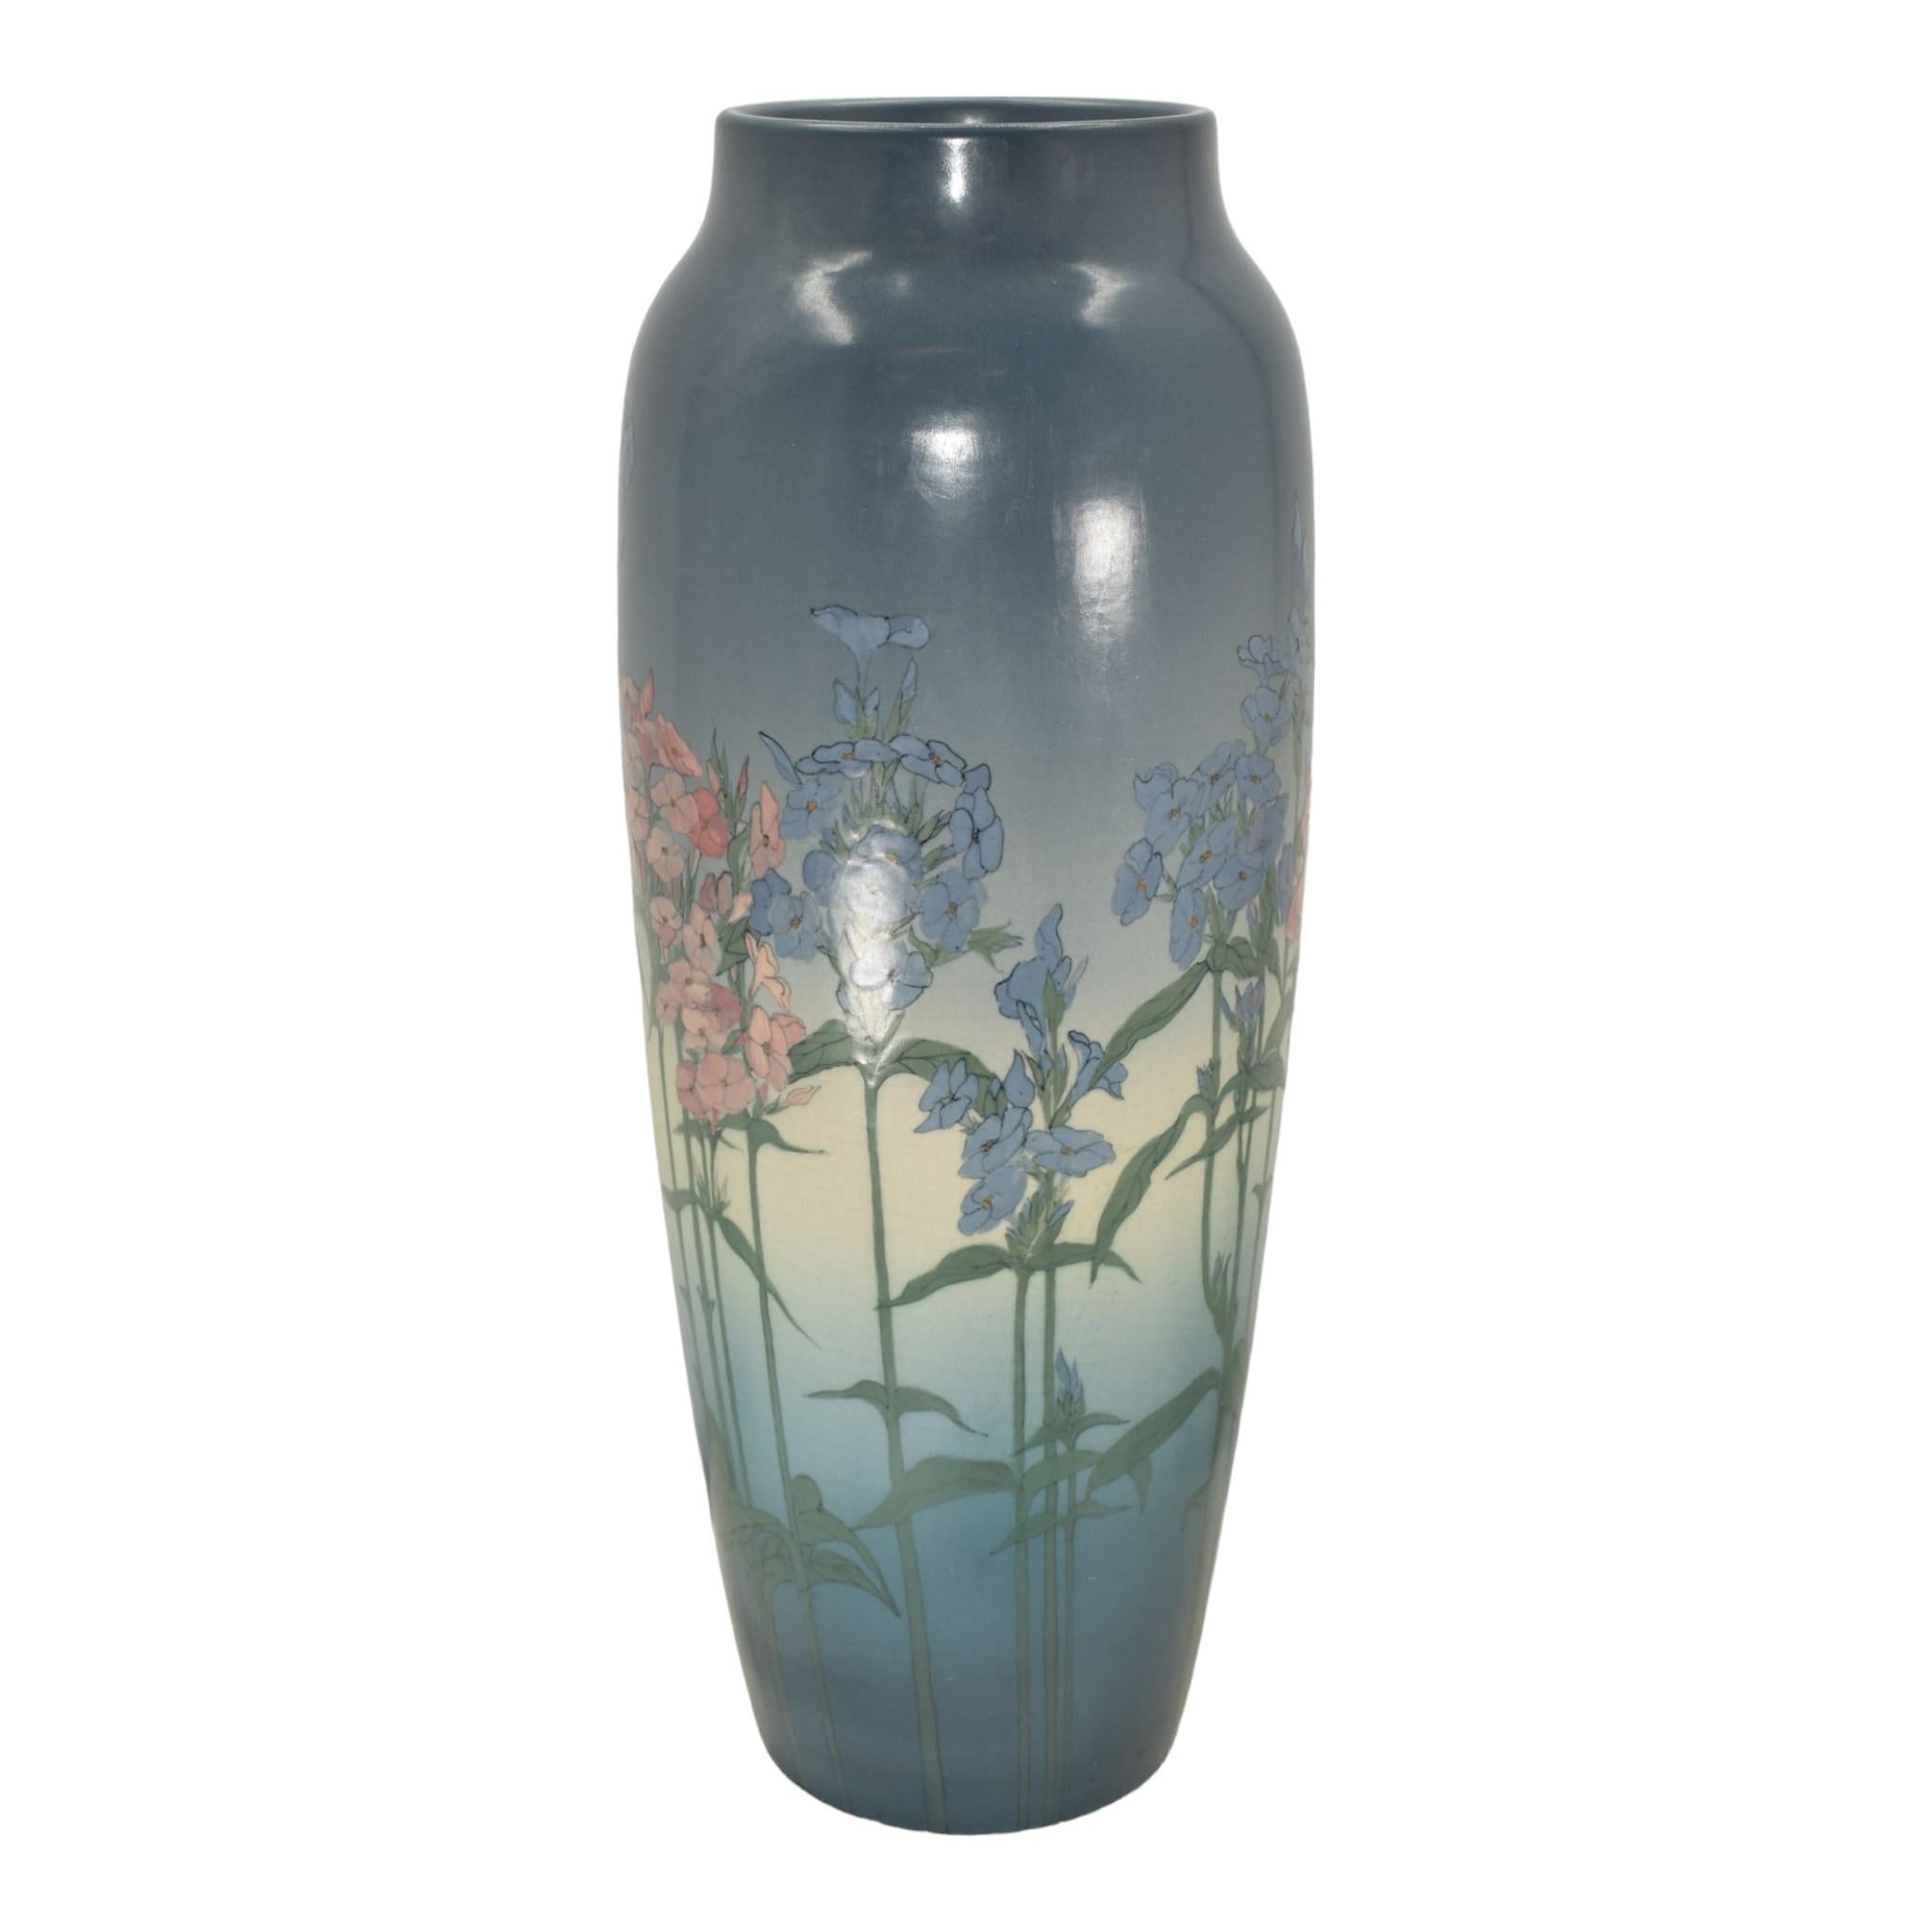 Rookwood 1920 Vintage Art Pottery Blue Vellum Ceramic Floor Vase 907A (Epply)
Large and stunning floor vase decorated with a beautiful and colorful floral design that goes around the perimeter of the body by Lorinda Epply.
Great colors and